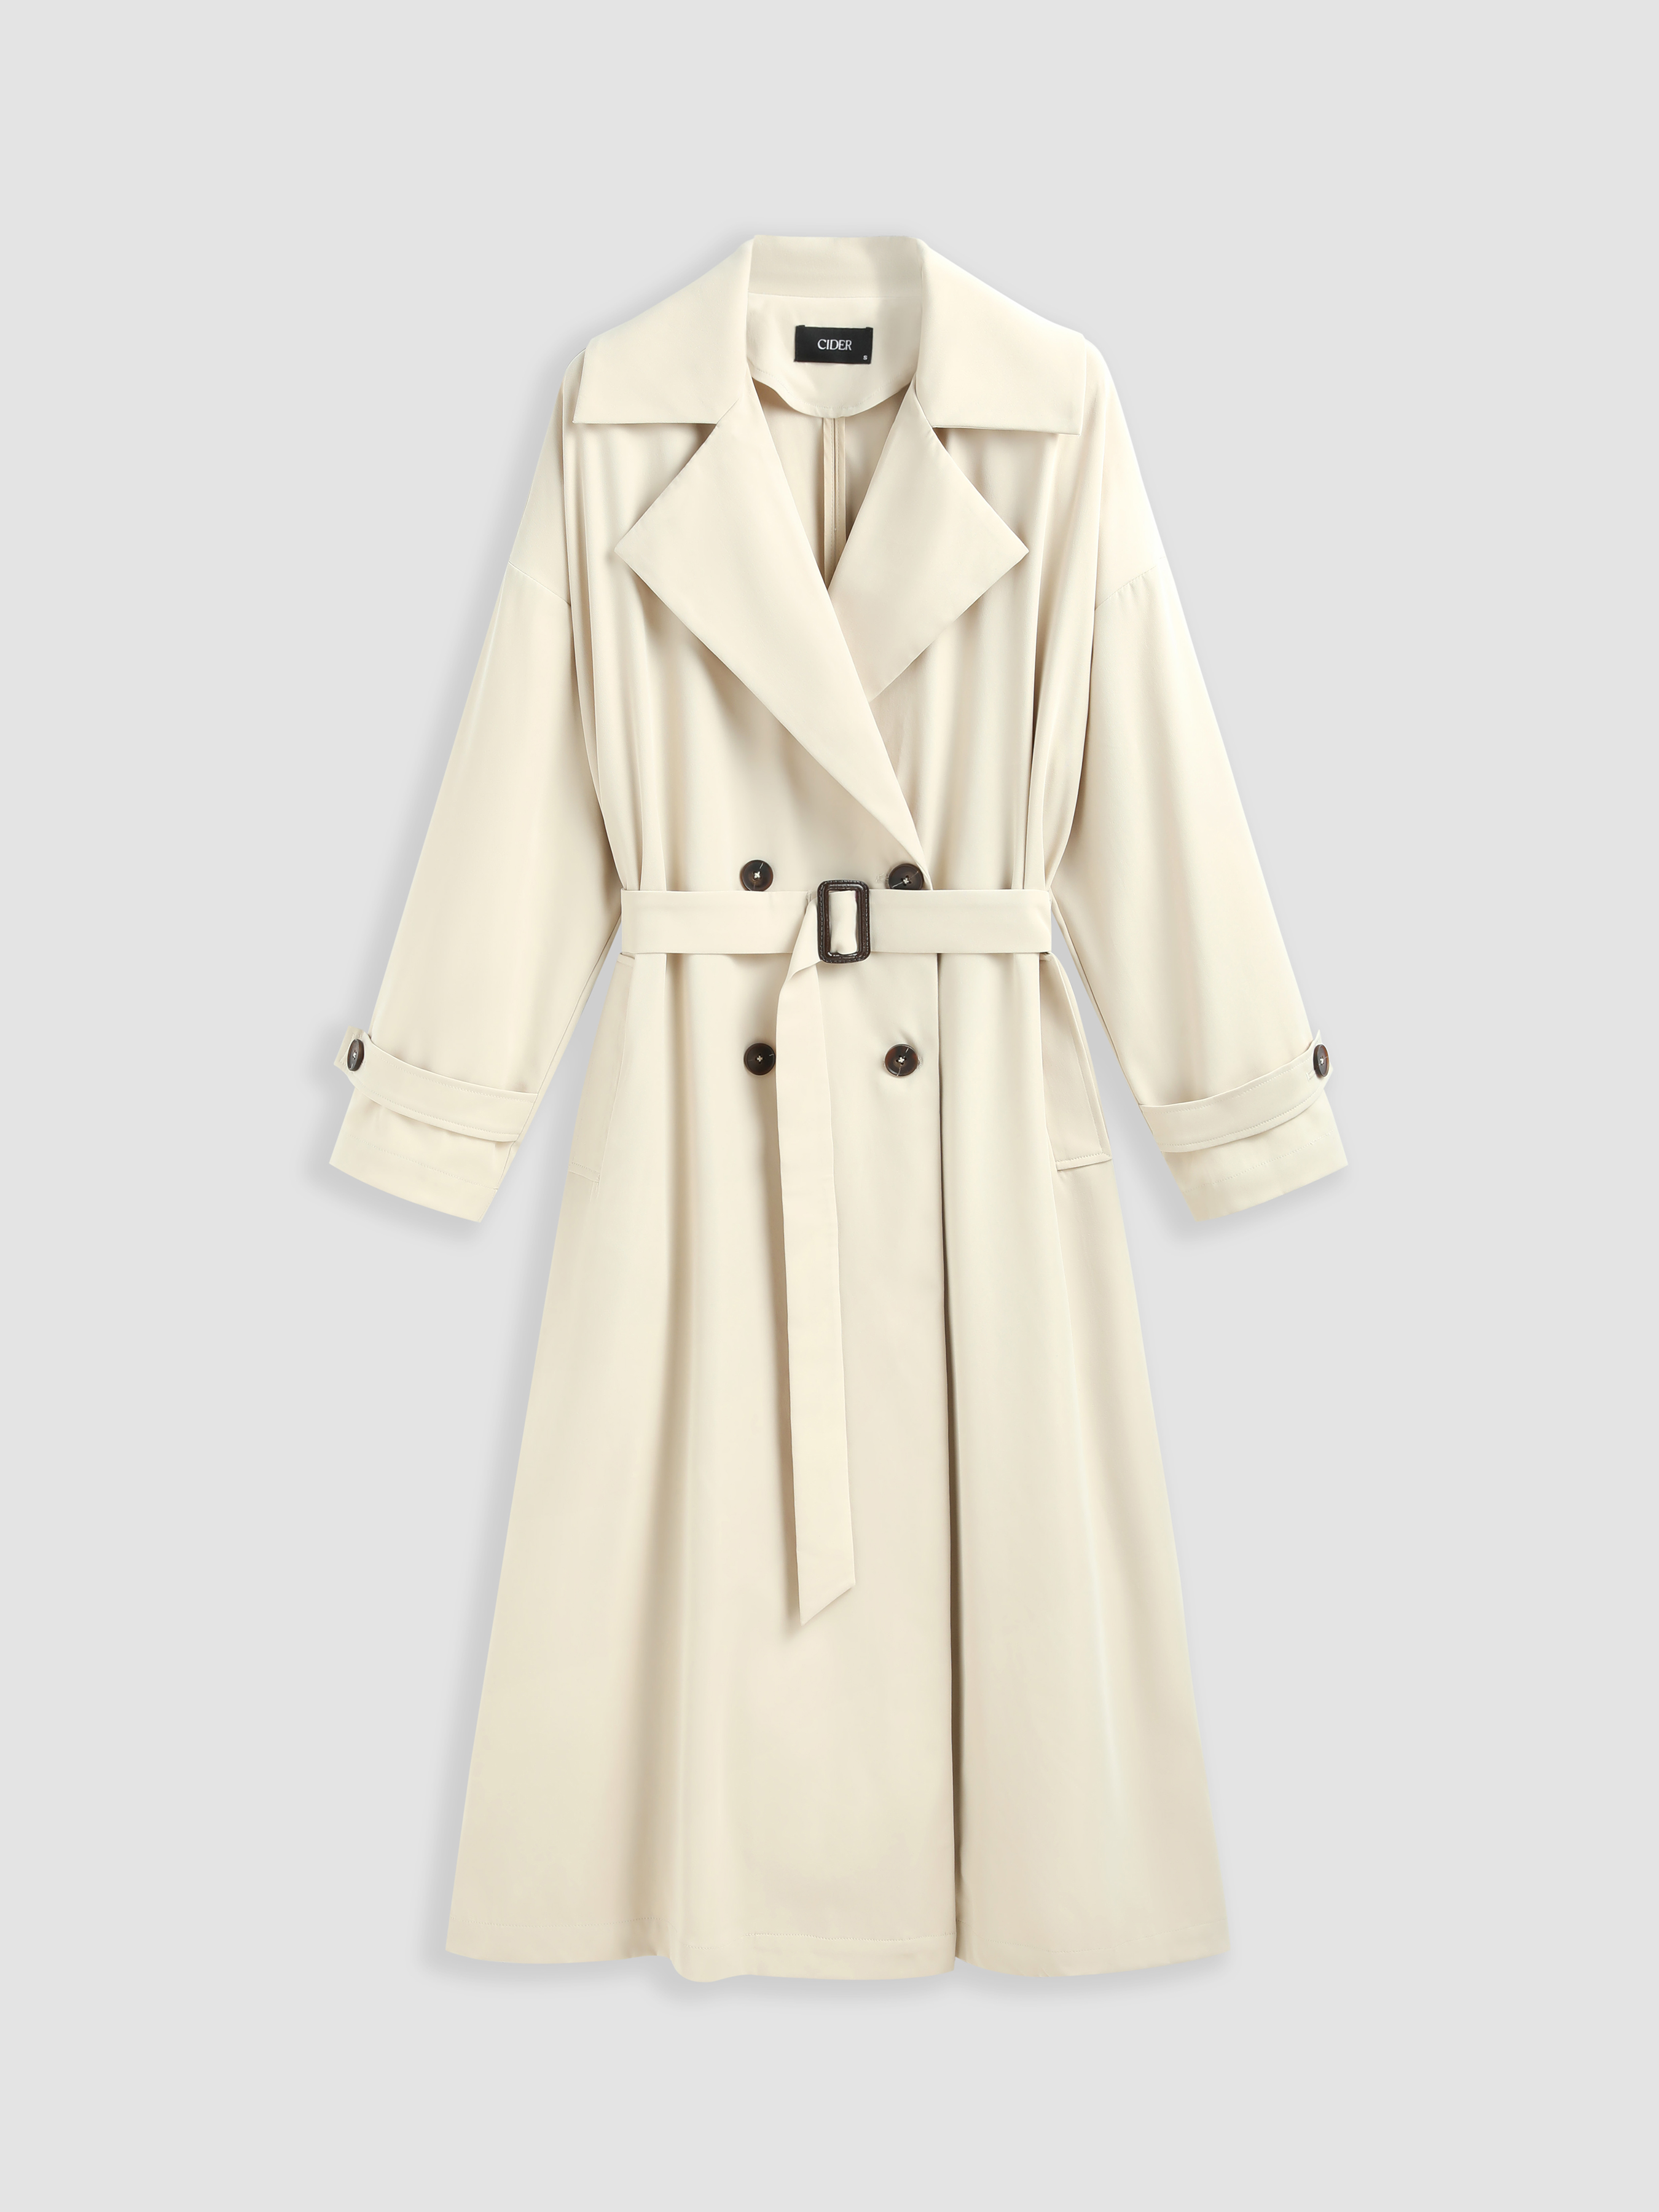 Oversized Solid Collar Long Trench Coat With Belt For Daily Casual